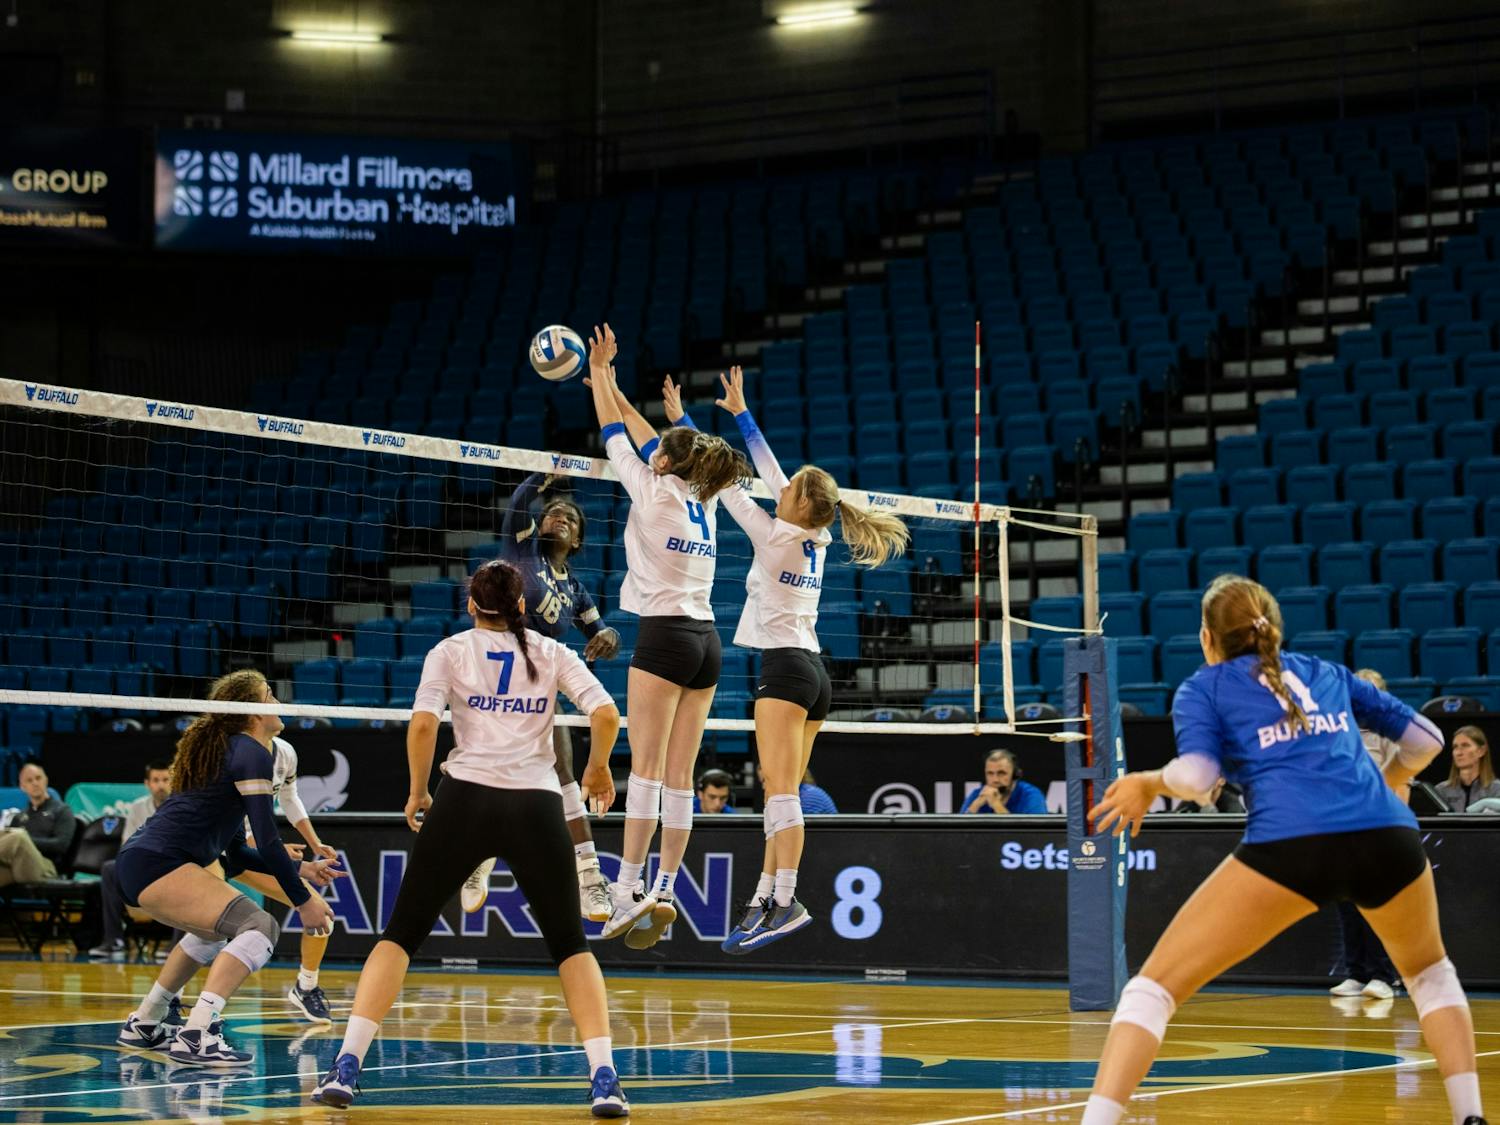 Women’s Volleyball earned a No. 6 seed in the upcoming MAC tournament with a win over Akron.